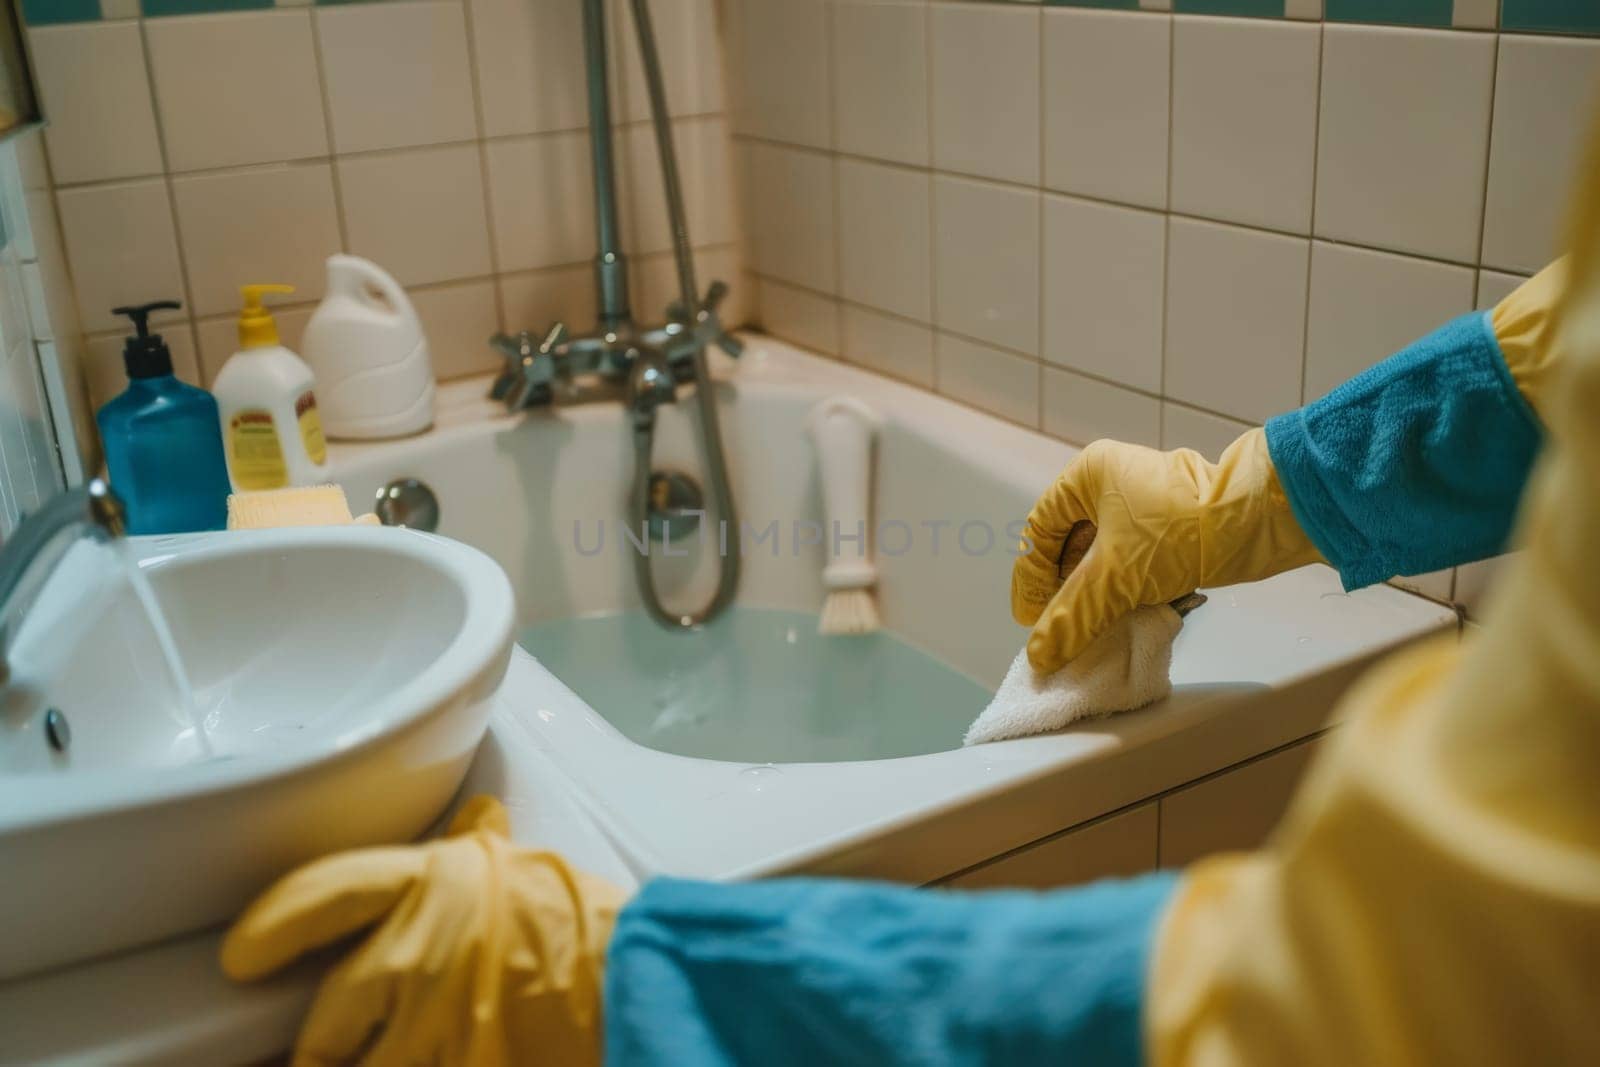 A person is cleaning a bathtub with a yellow glove on by nateemee